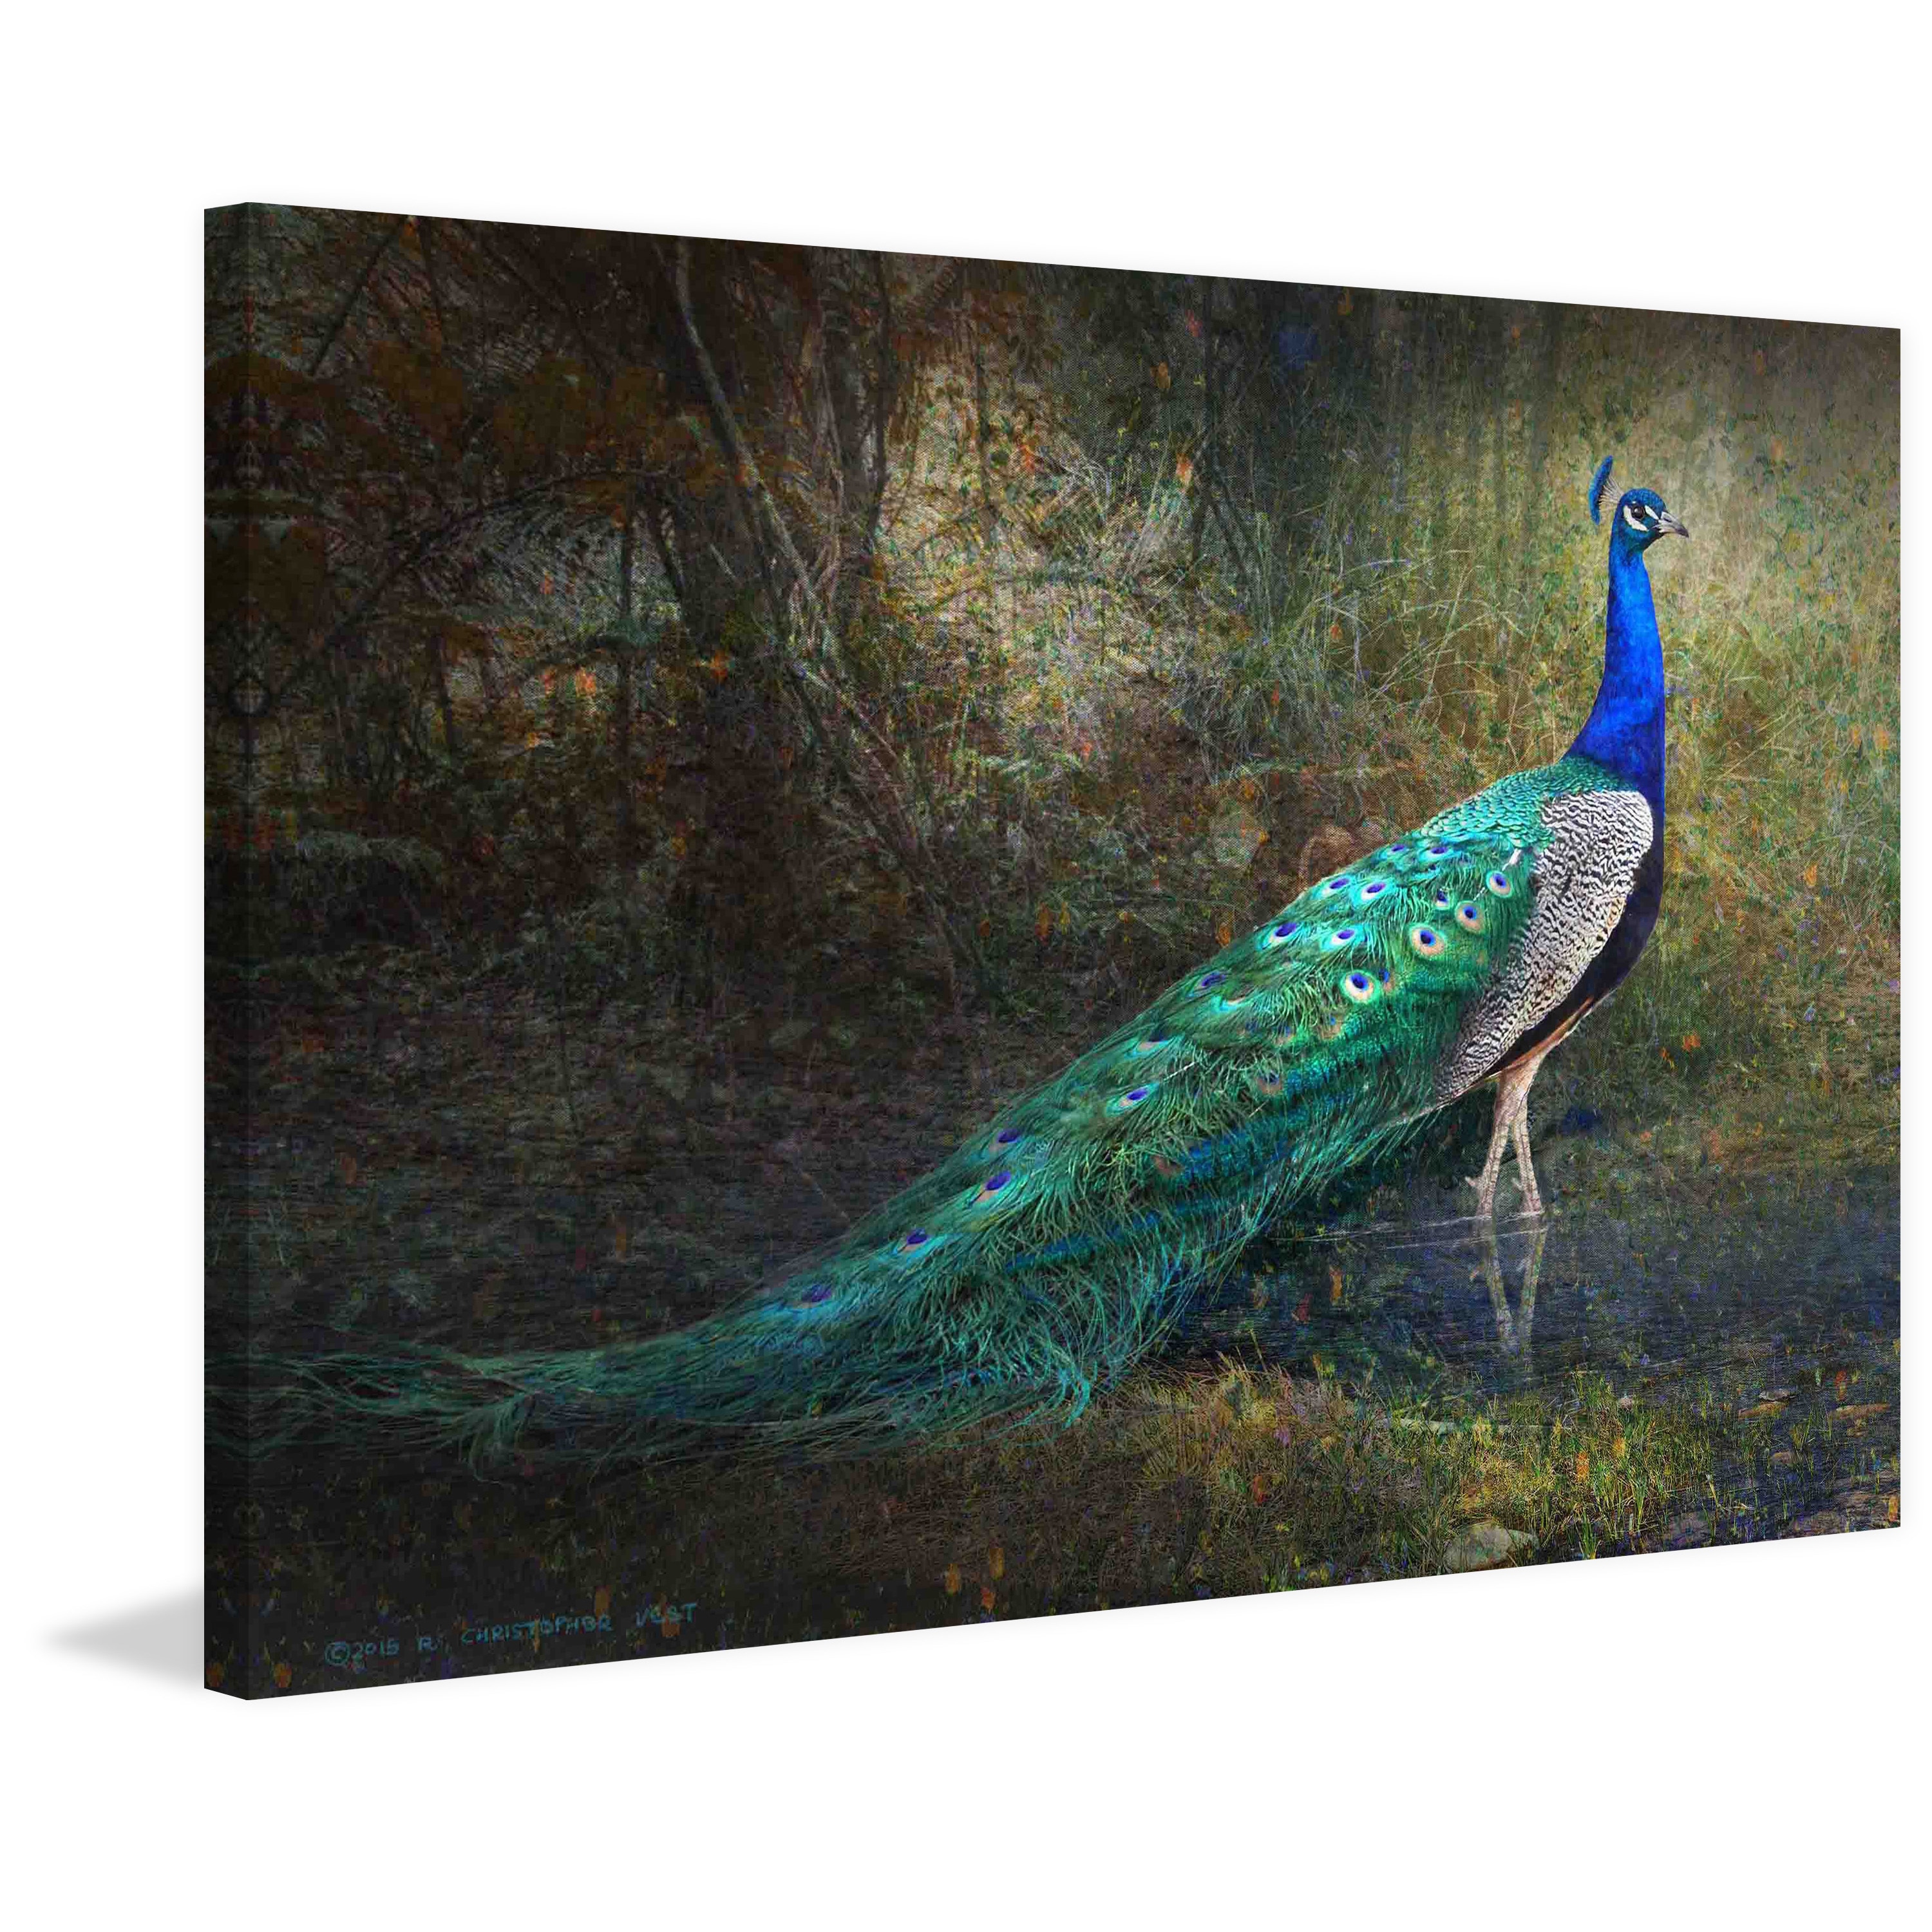 Pecock On Canvas by Ihab Print